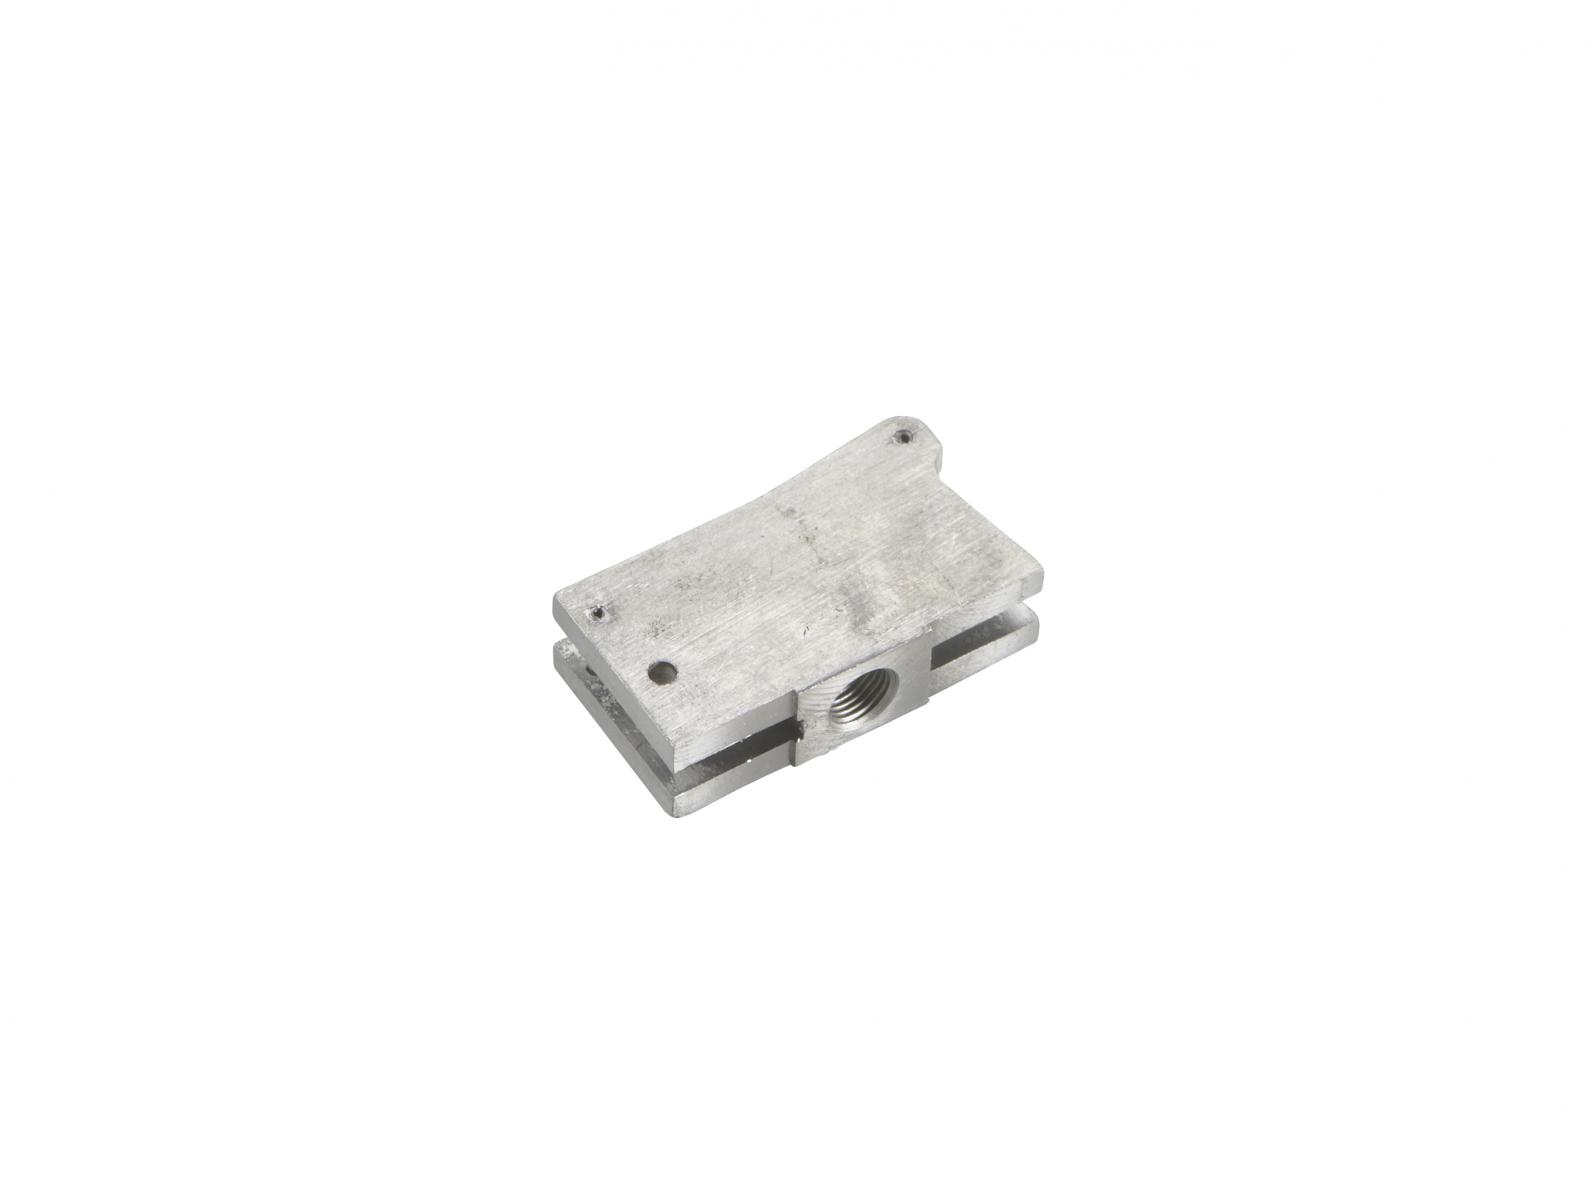 TapeTech® Drive Dog Holder Assembly. Part number 054118F